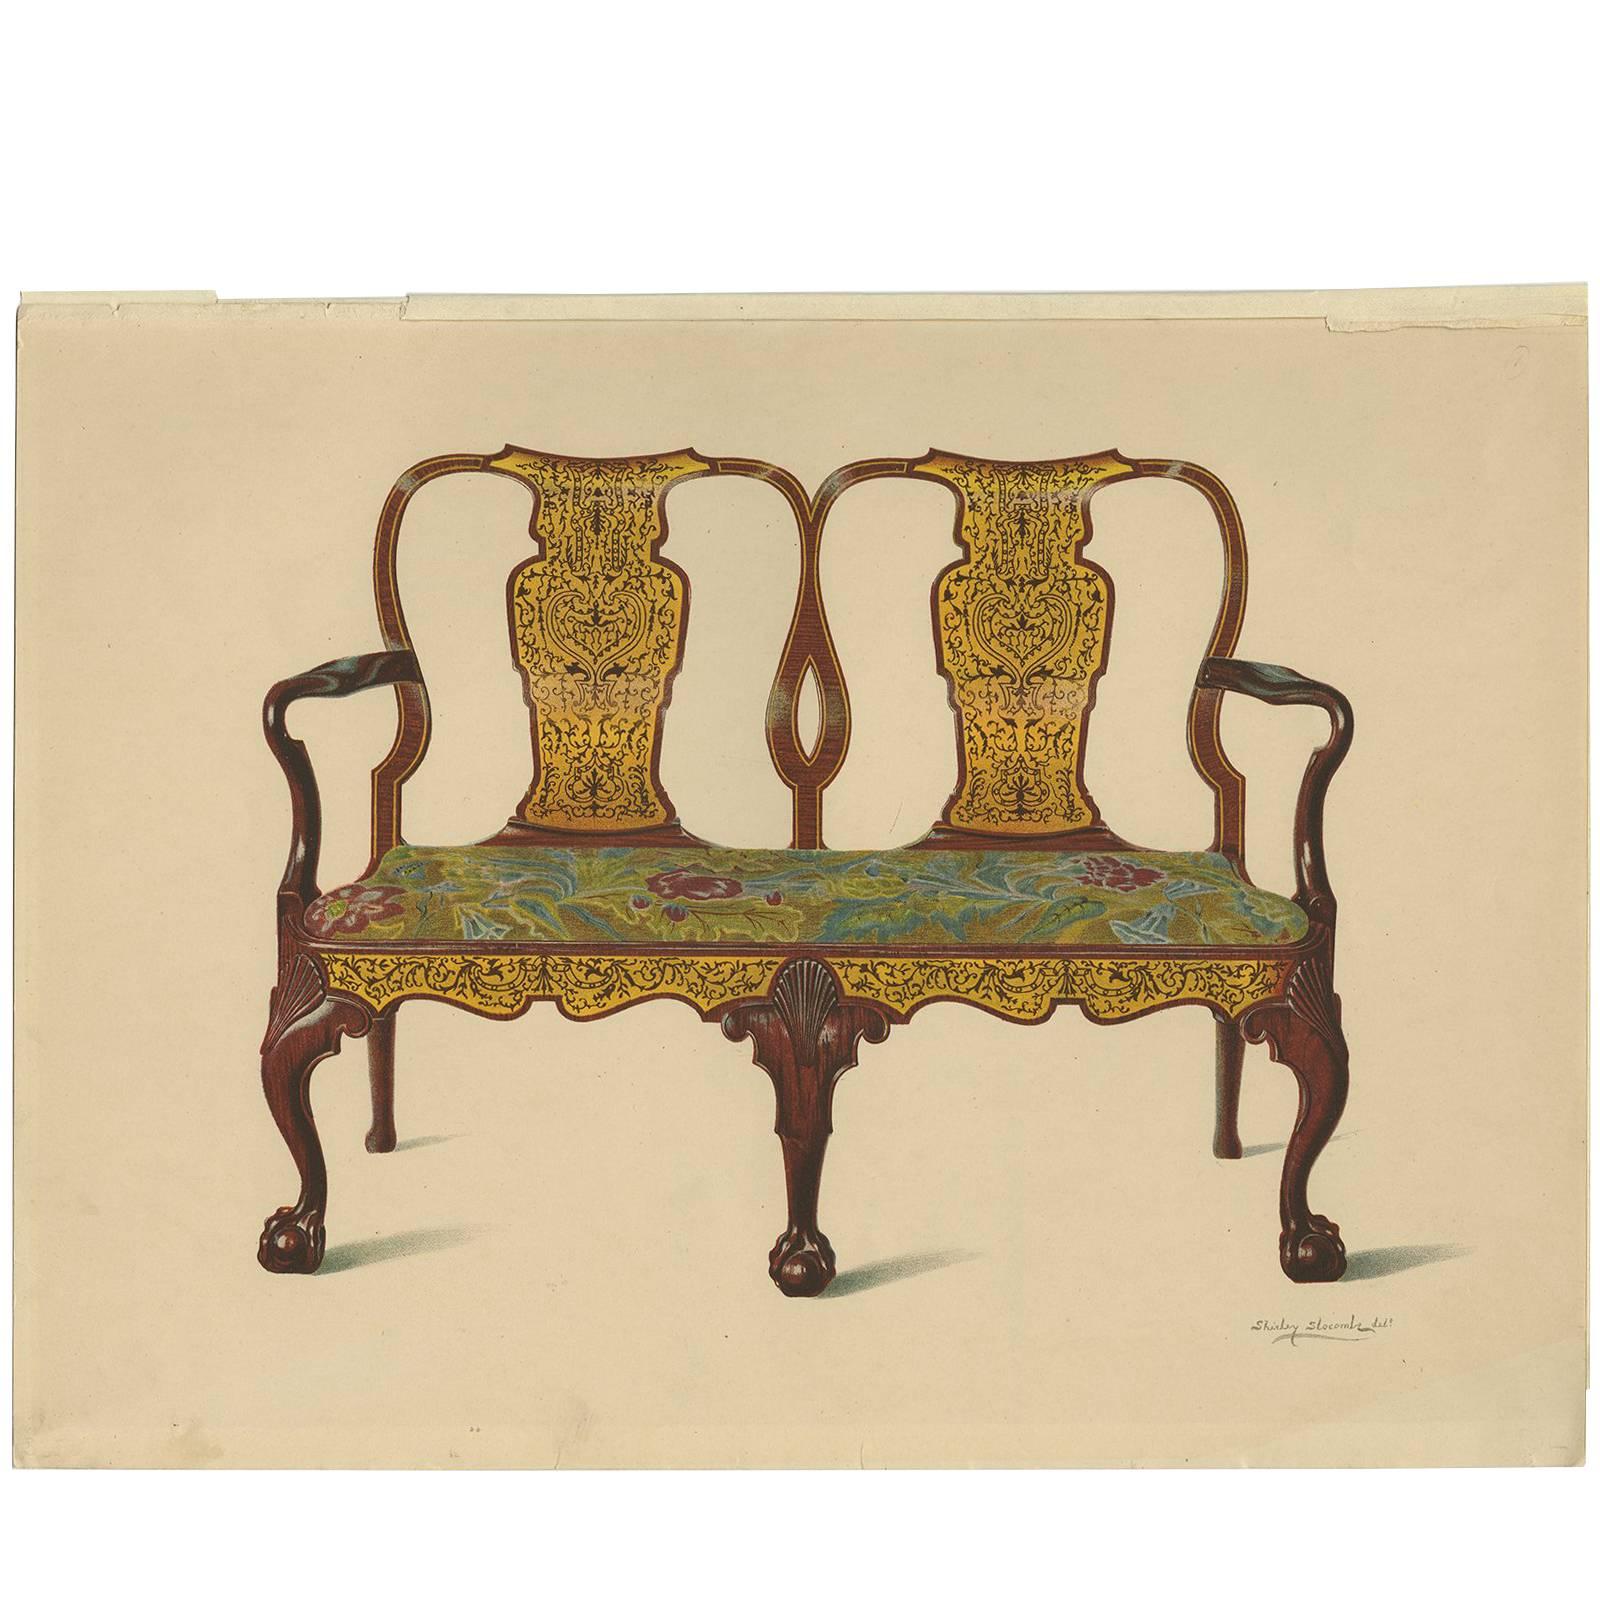 Antique Print English Furniture 'Walnut Settee' by P. Macquoid, 1906